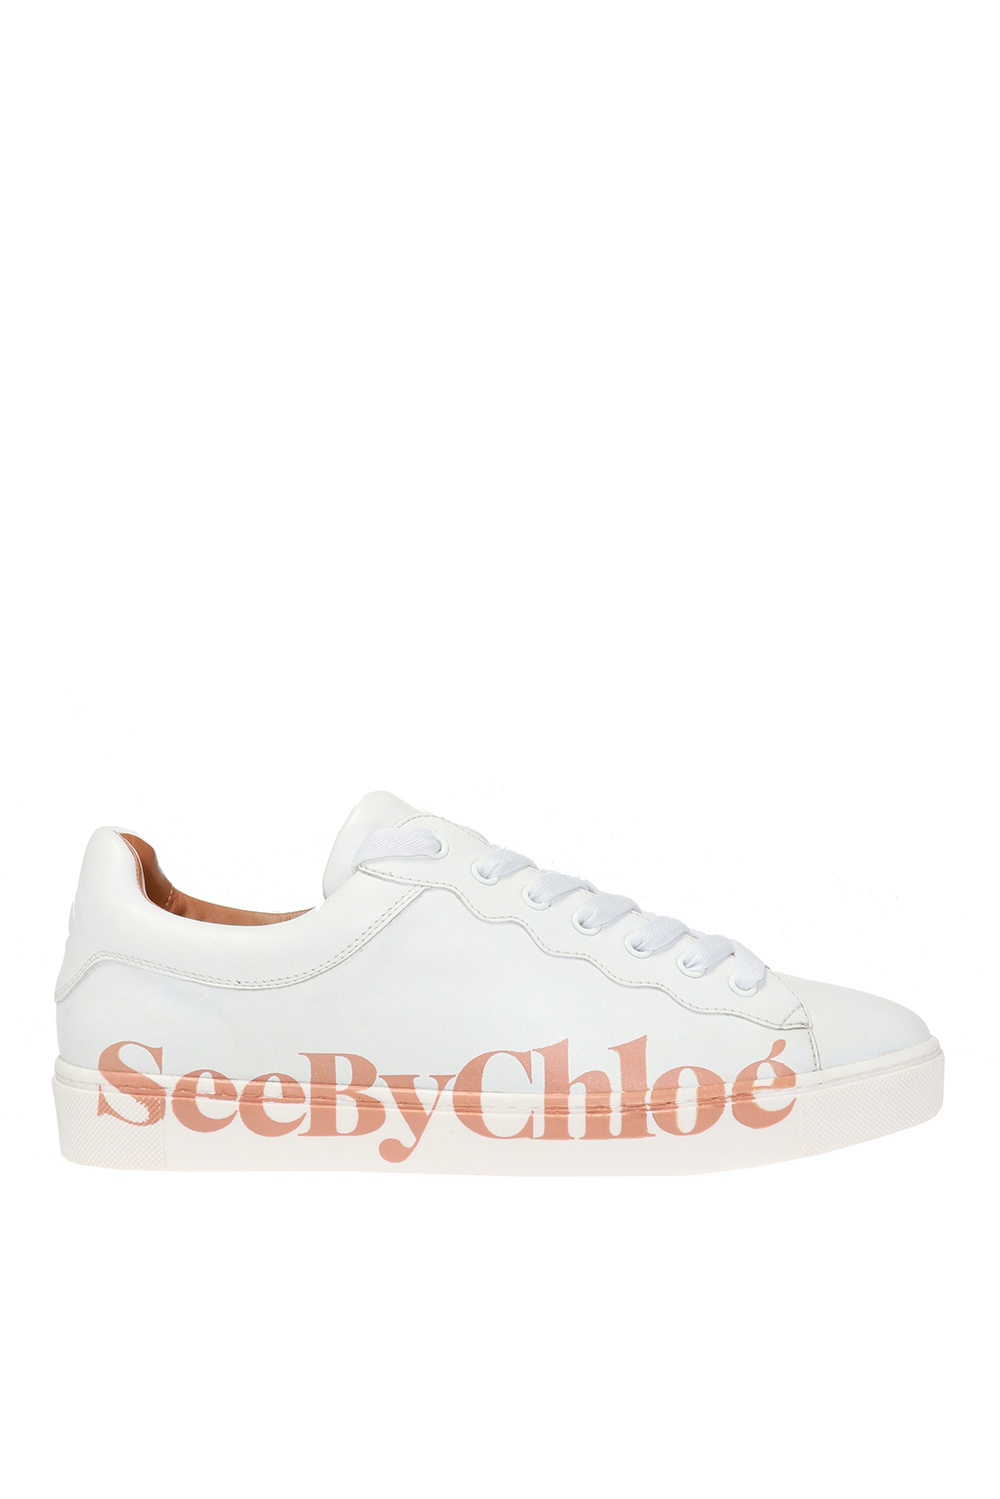 See By Chloe ‘Essie’ sneakers with logo